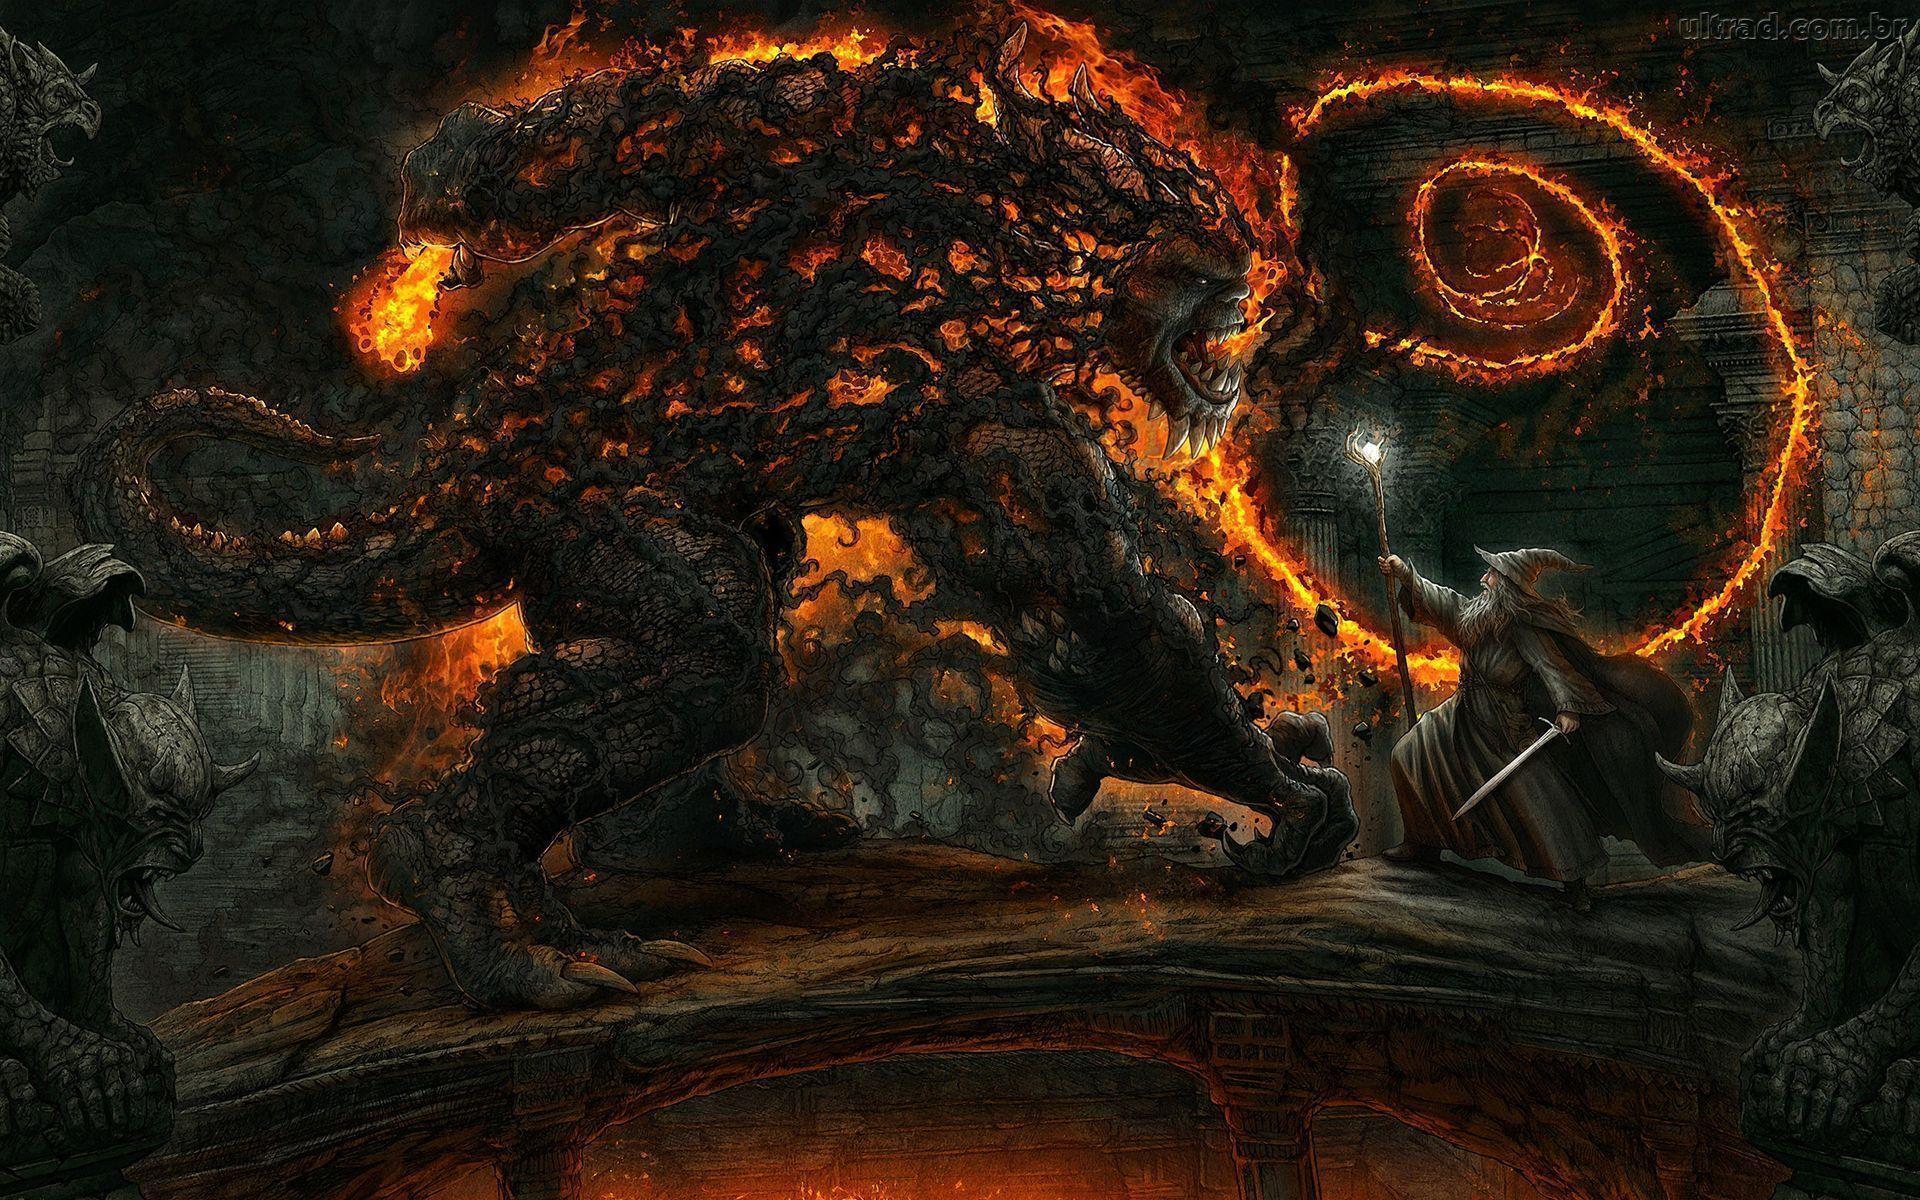 Hd Wallpaper Balrog Gandalf The Lord Of The Rings Fantasy Work